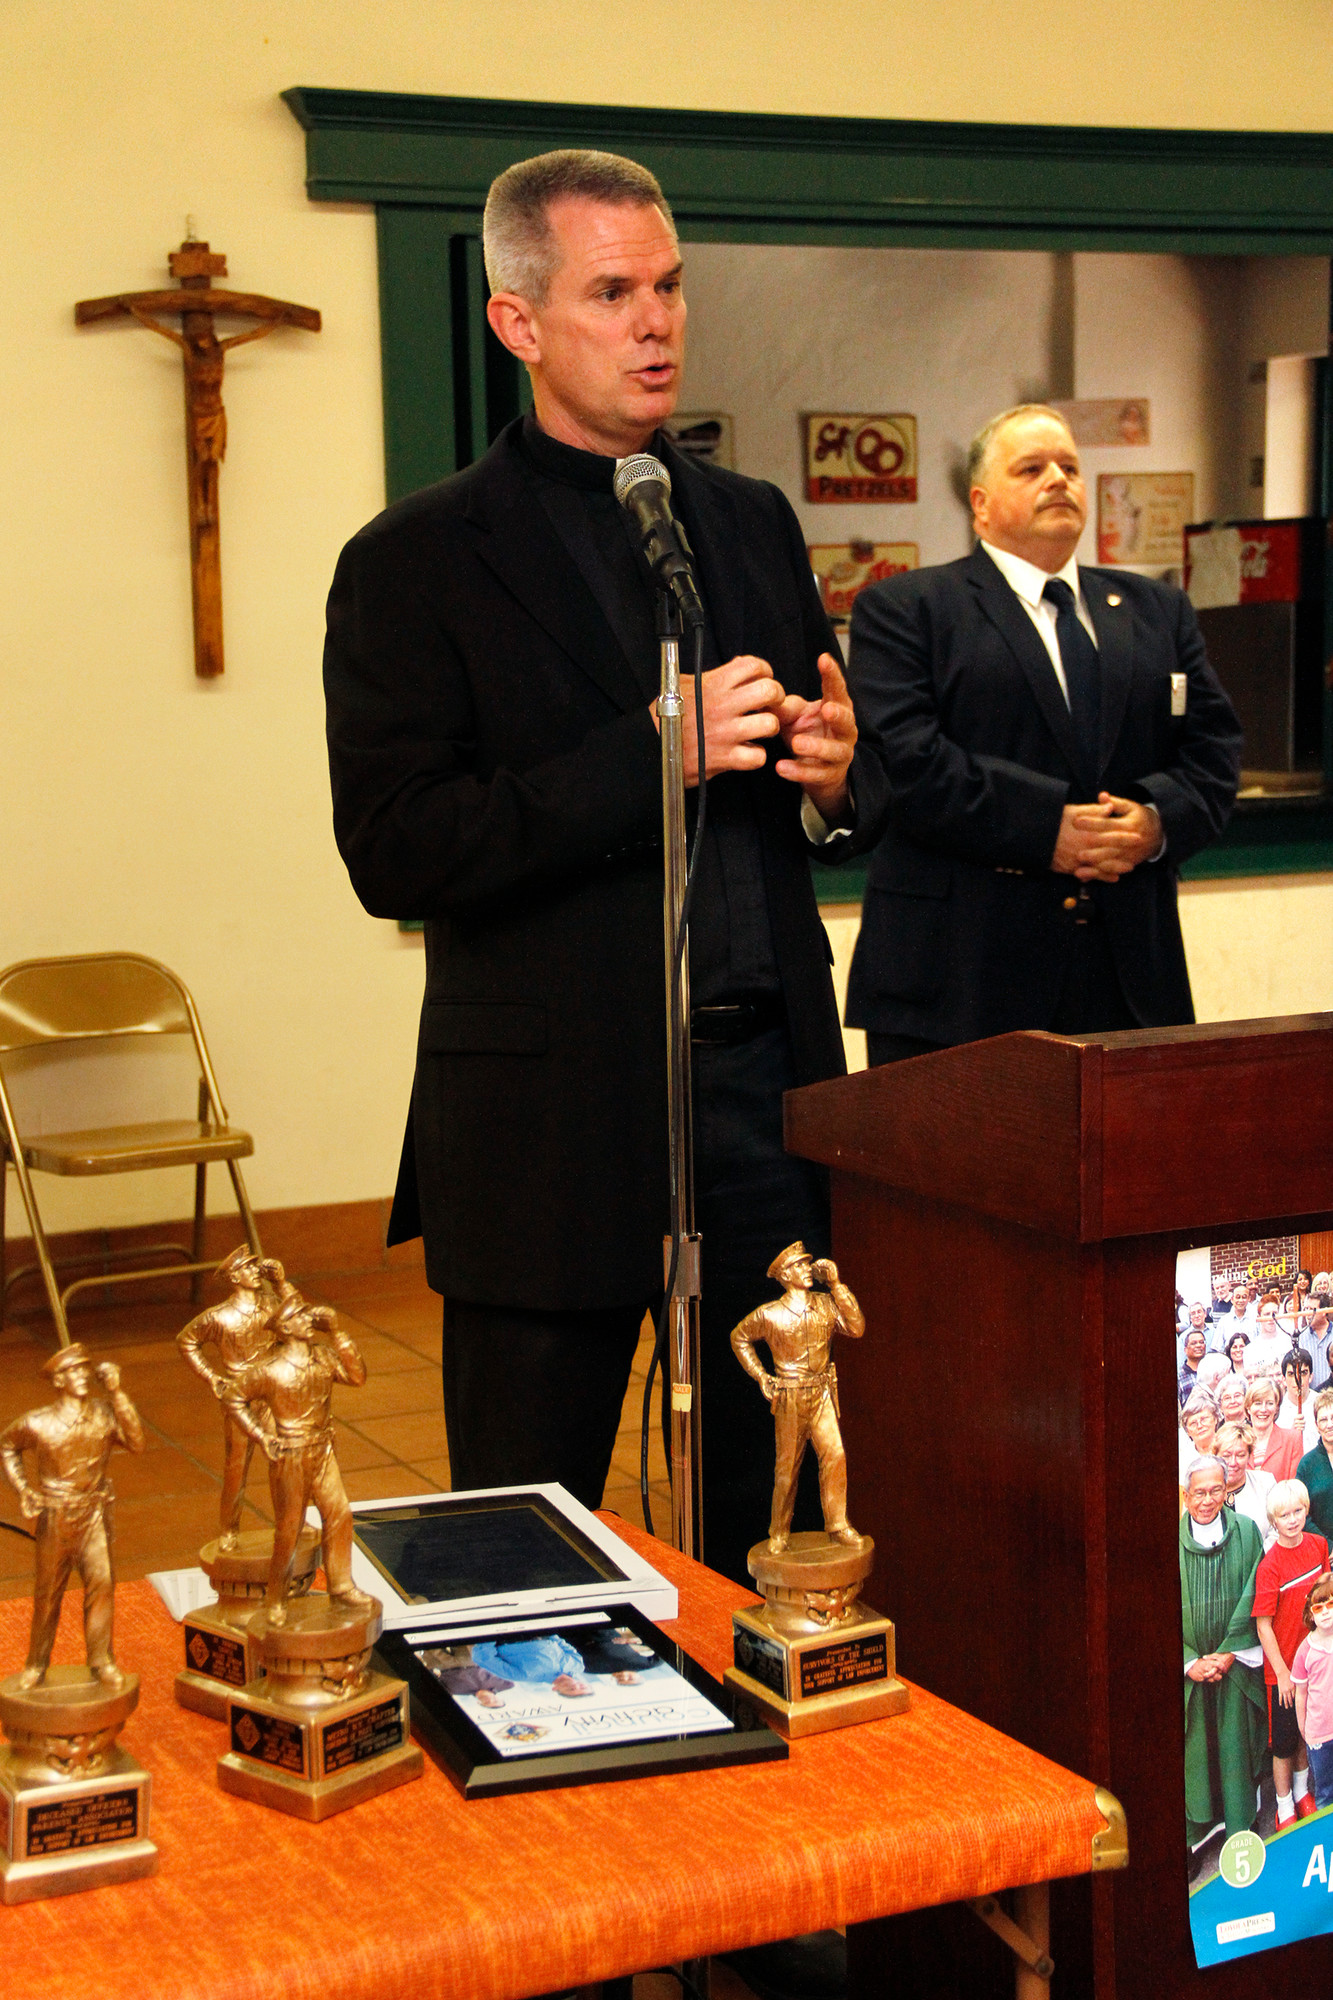 Father peter dugandzic was honored with a Grand Knights award.